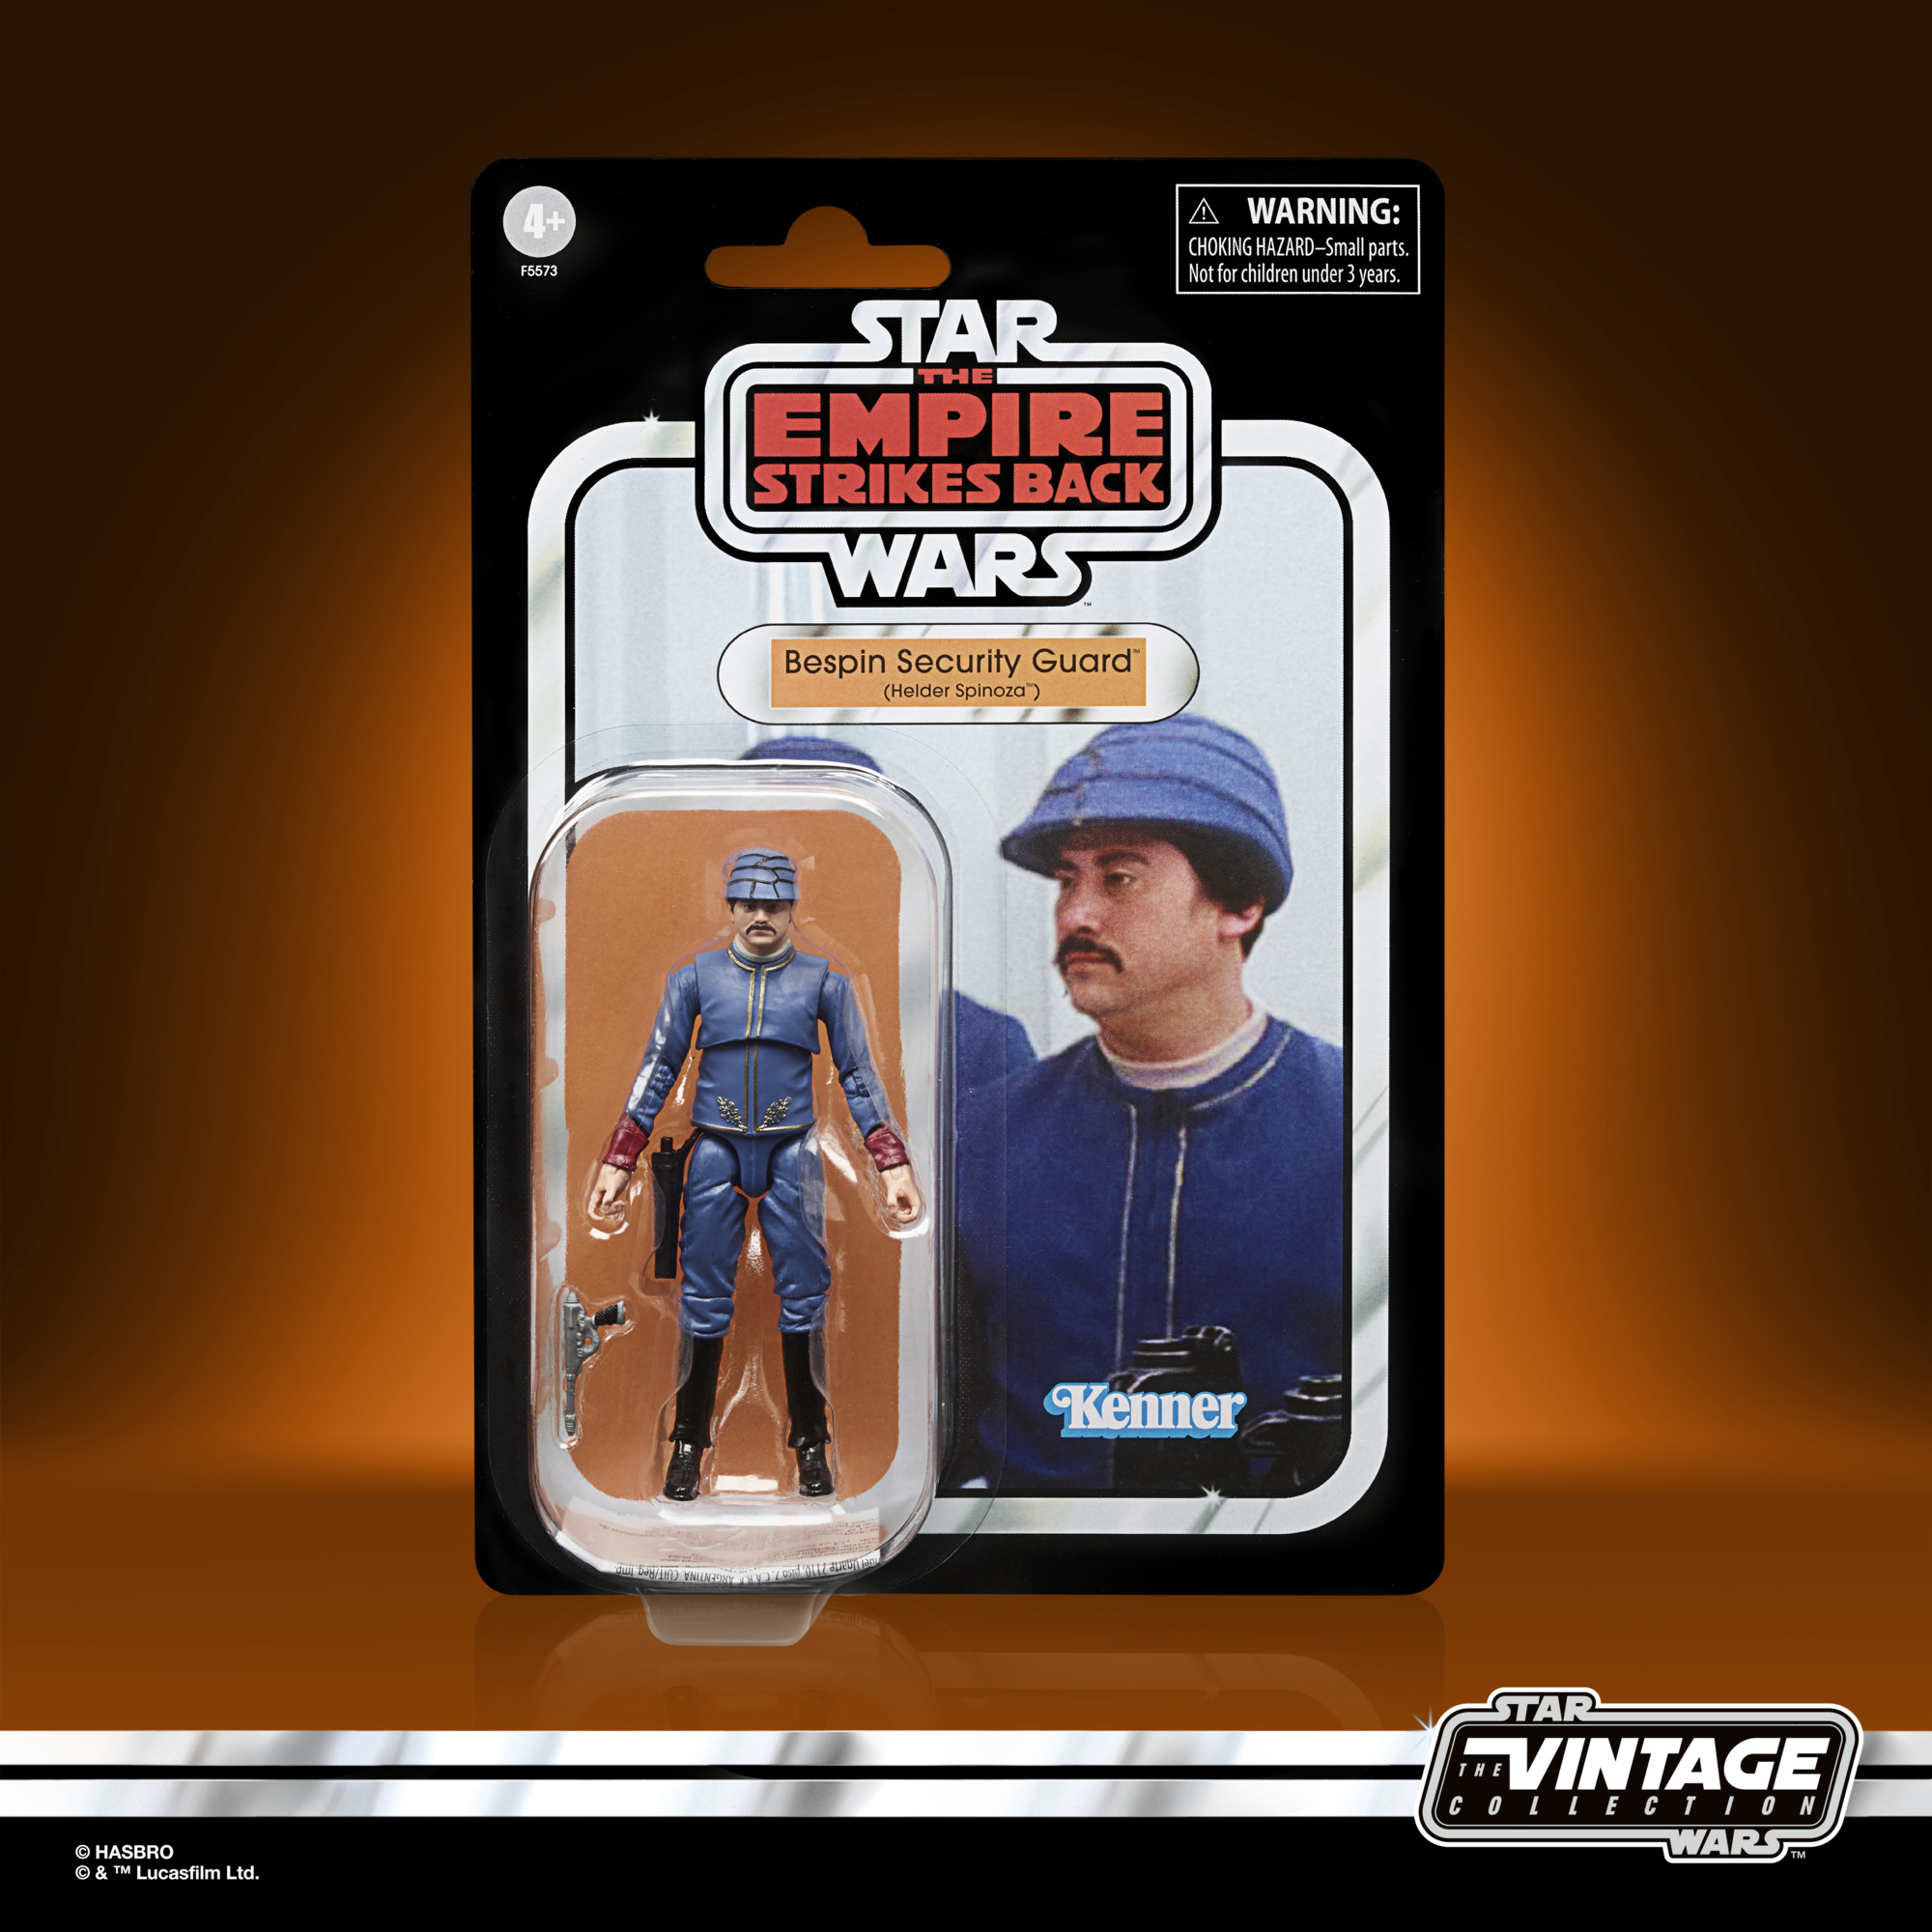 Star Wars The Vintage Collection Bespin Security Guard (Helder Spinoza) F55735L6 5010993968305